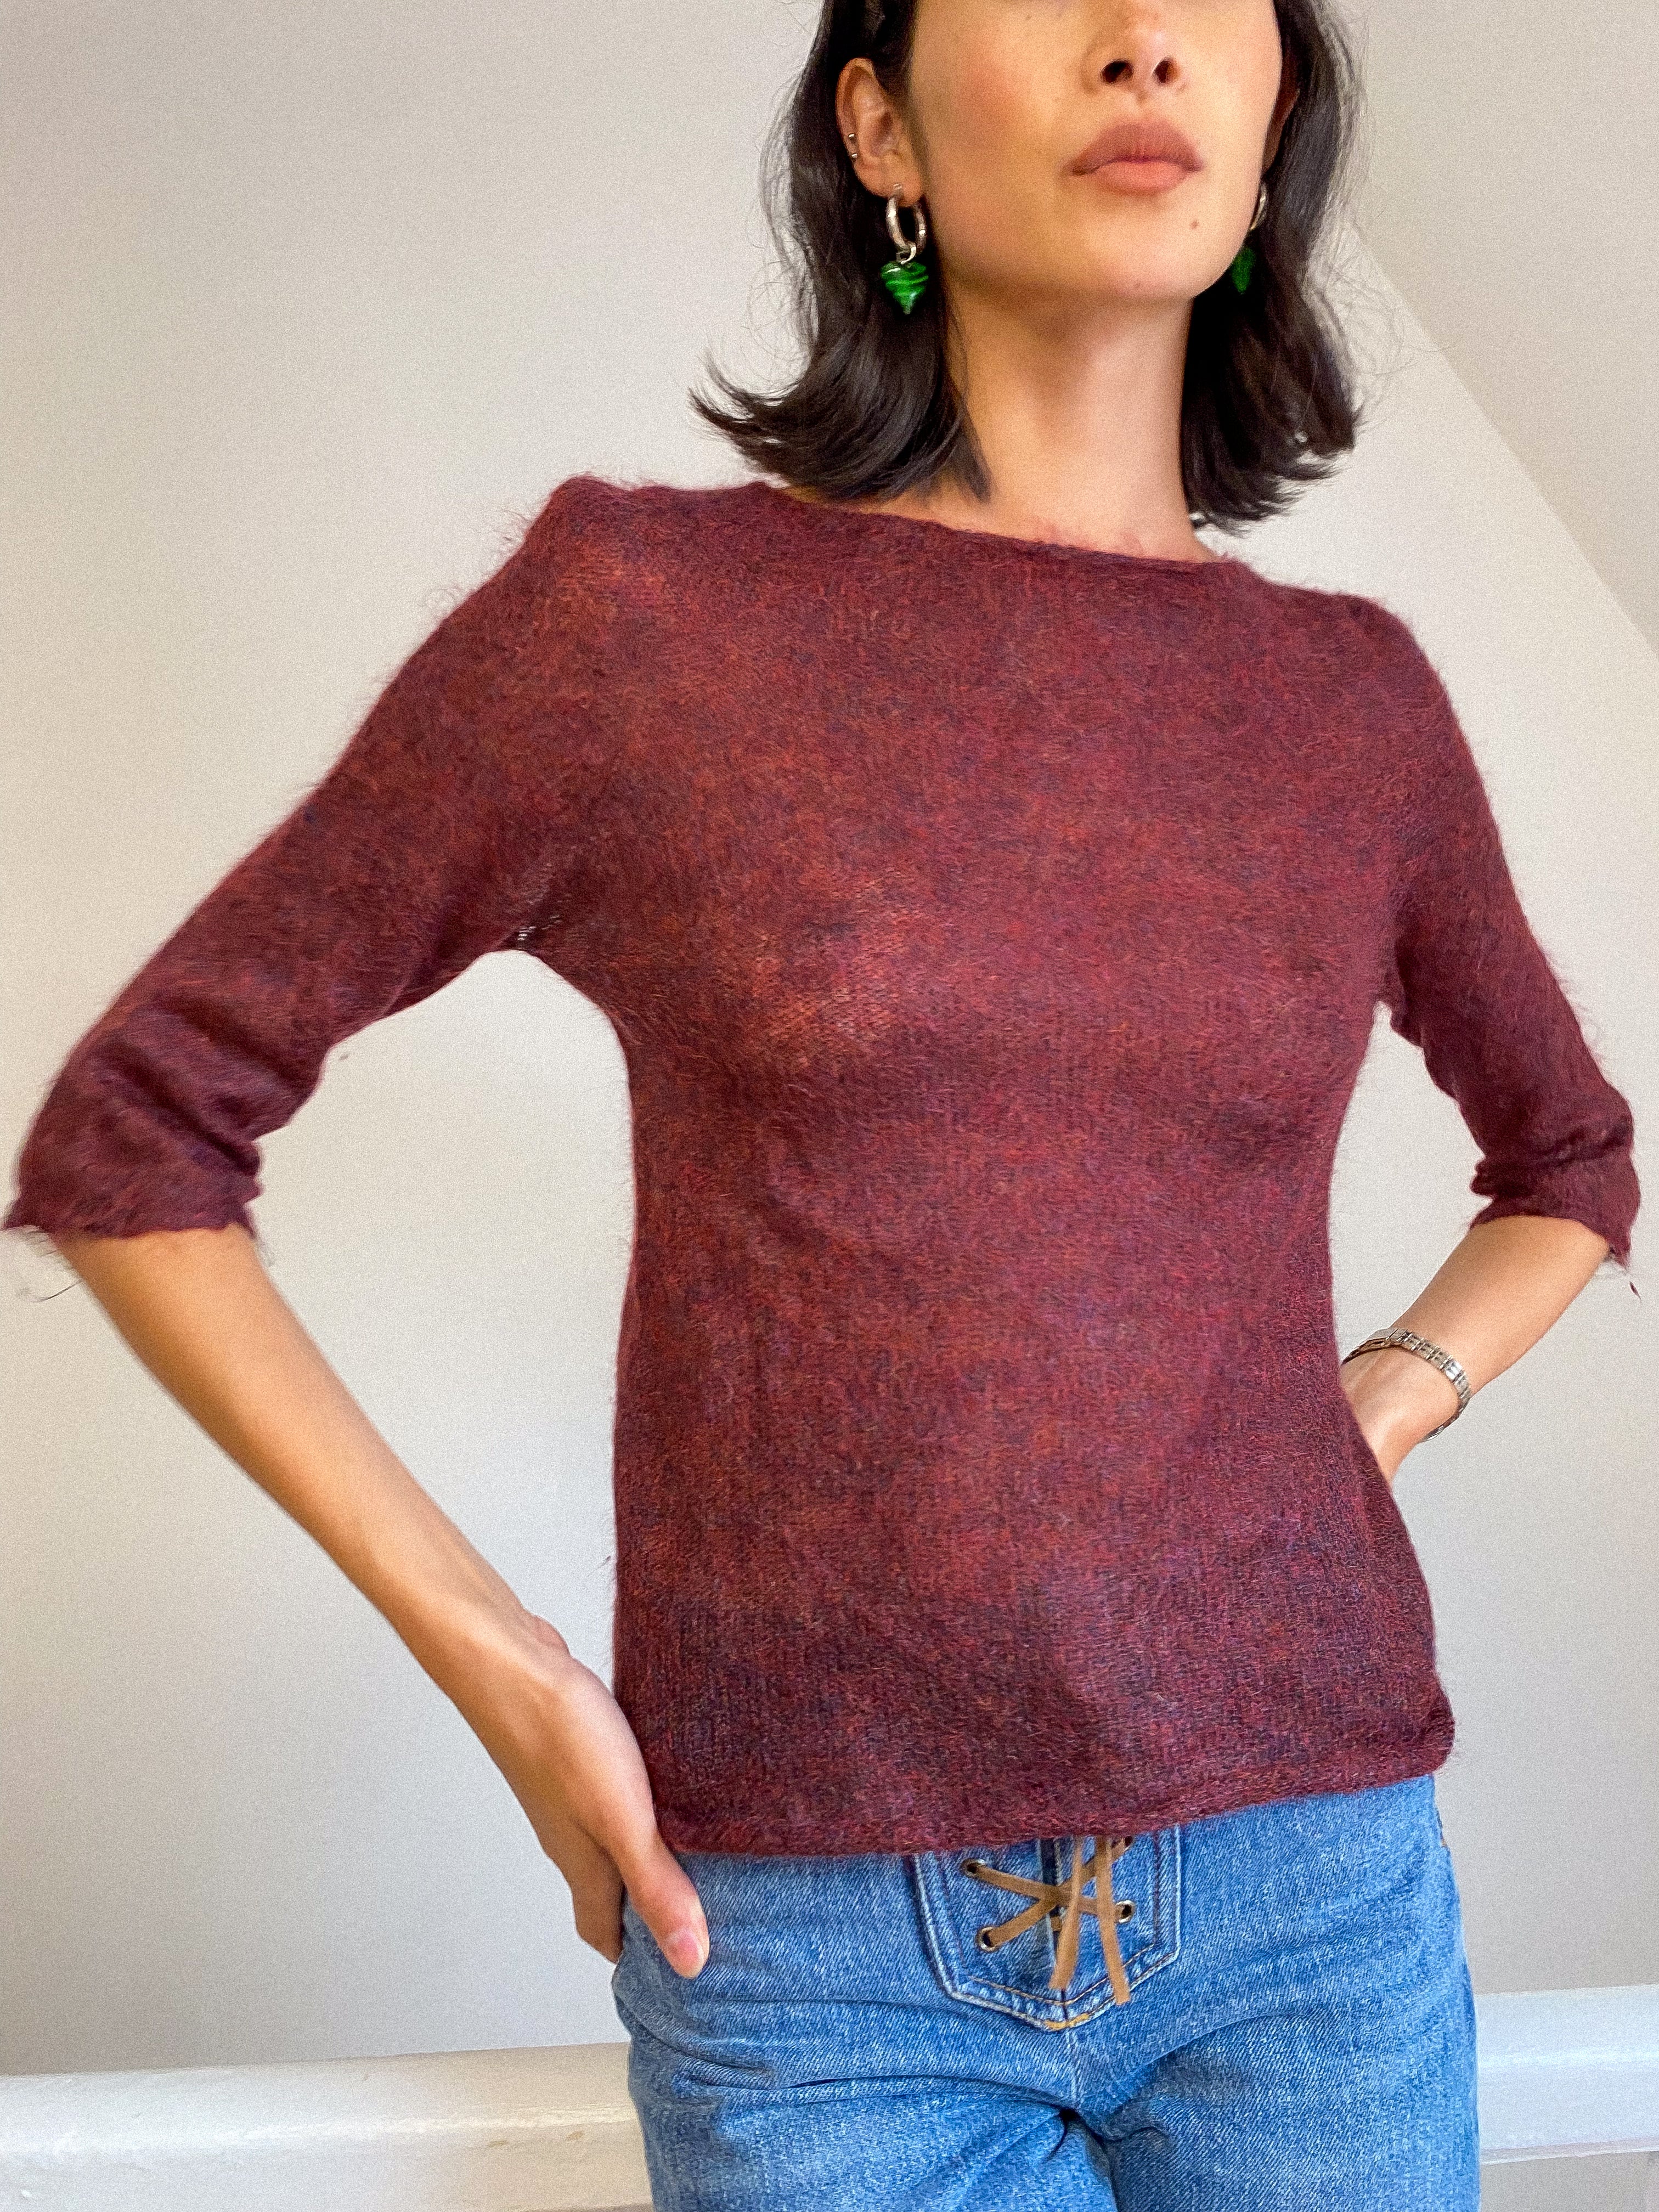 Relaxed fit, mohair knit jumper in a stunning rust red tonal colour. Part of the Tricot range from Marella